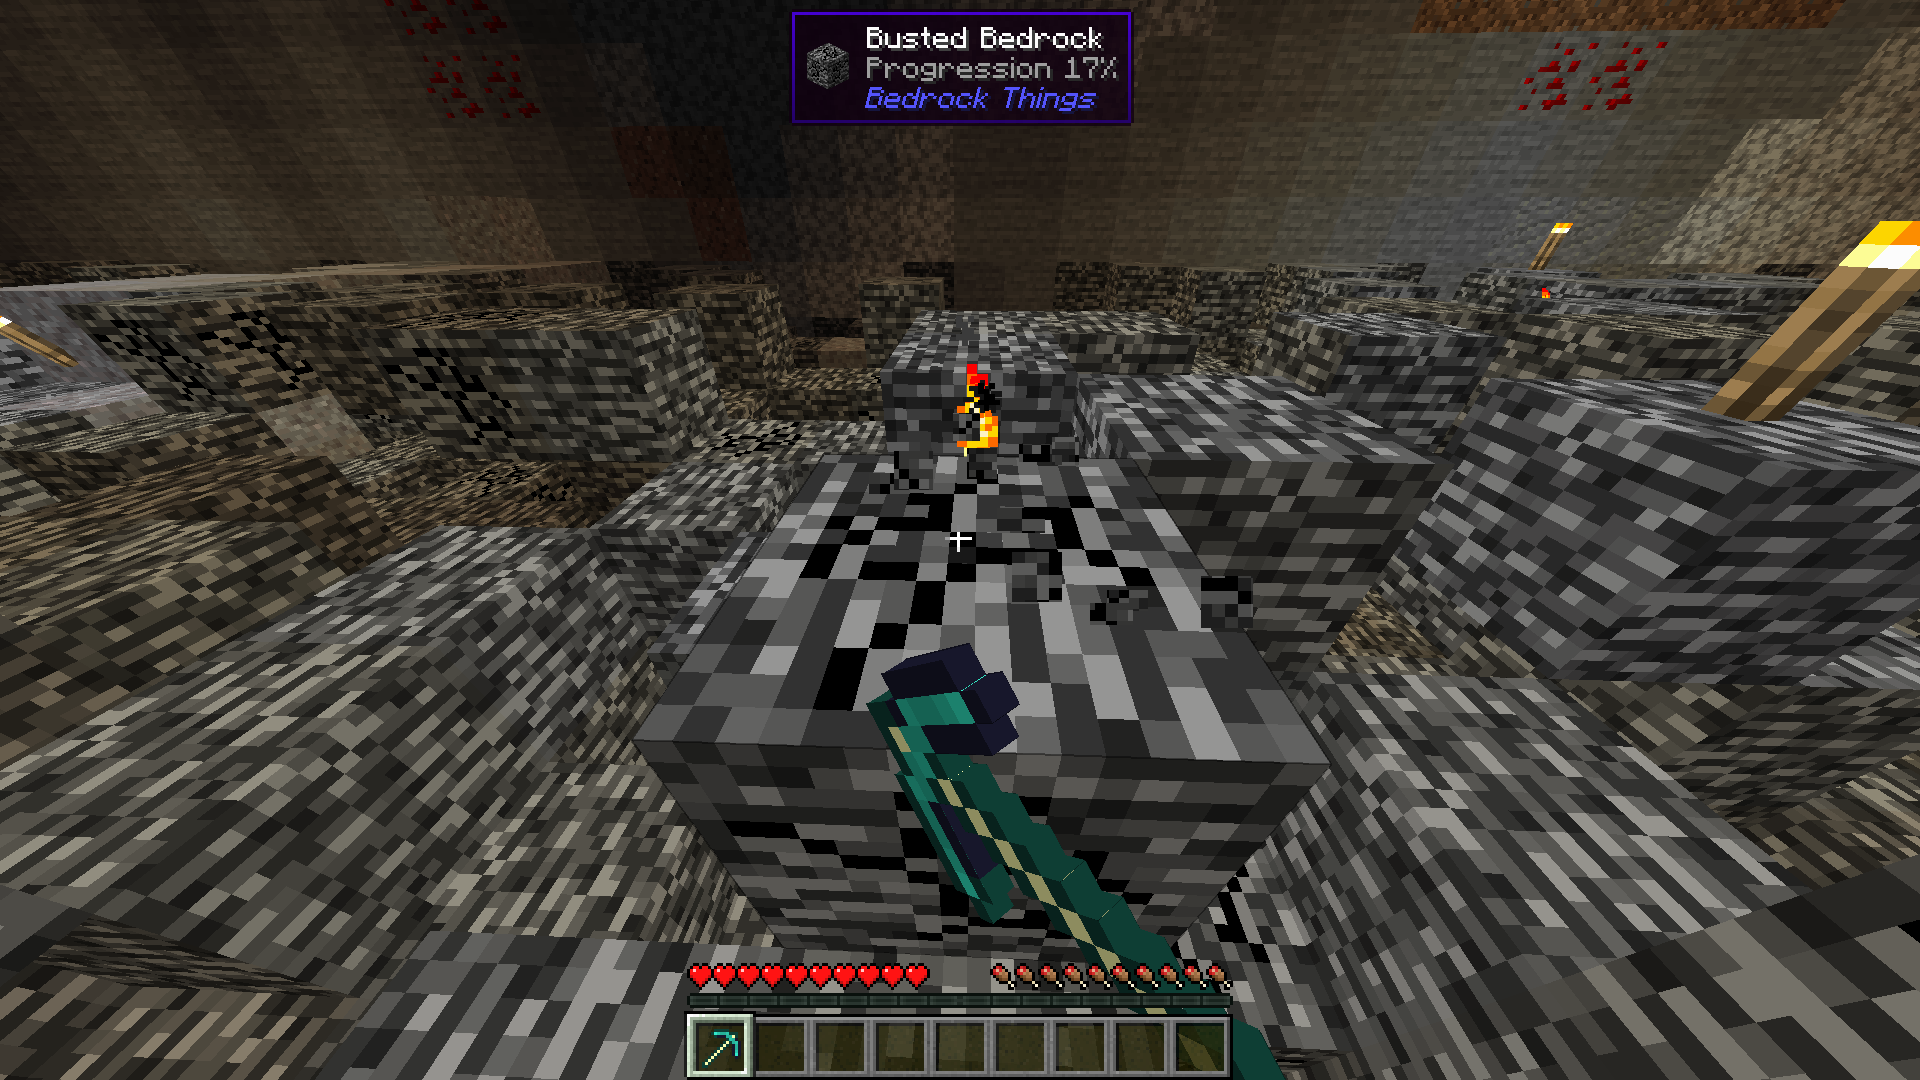 Mining Busted Bedrock with a Charged Diamond Pickaxe